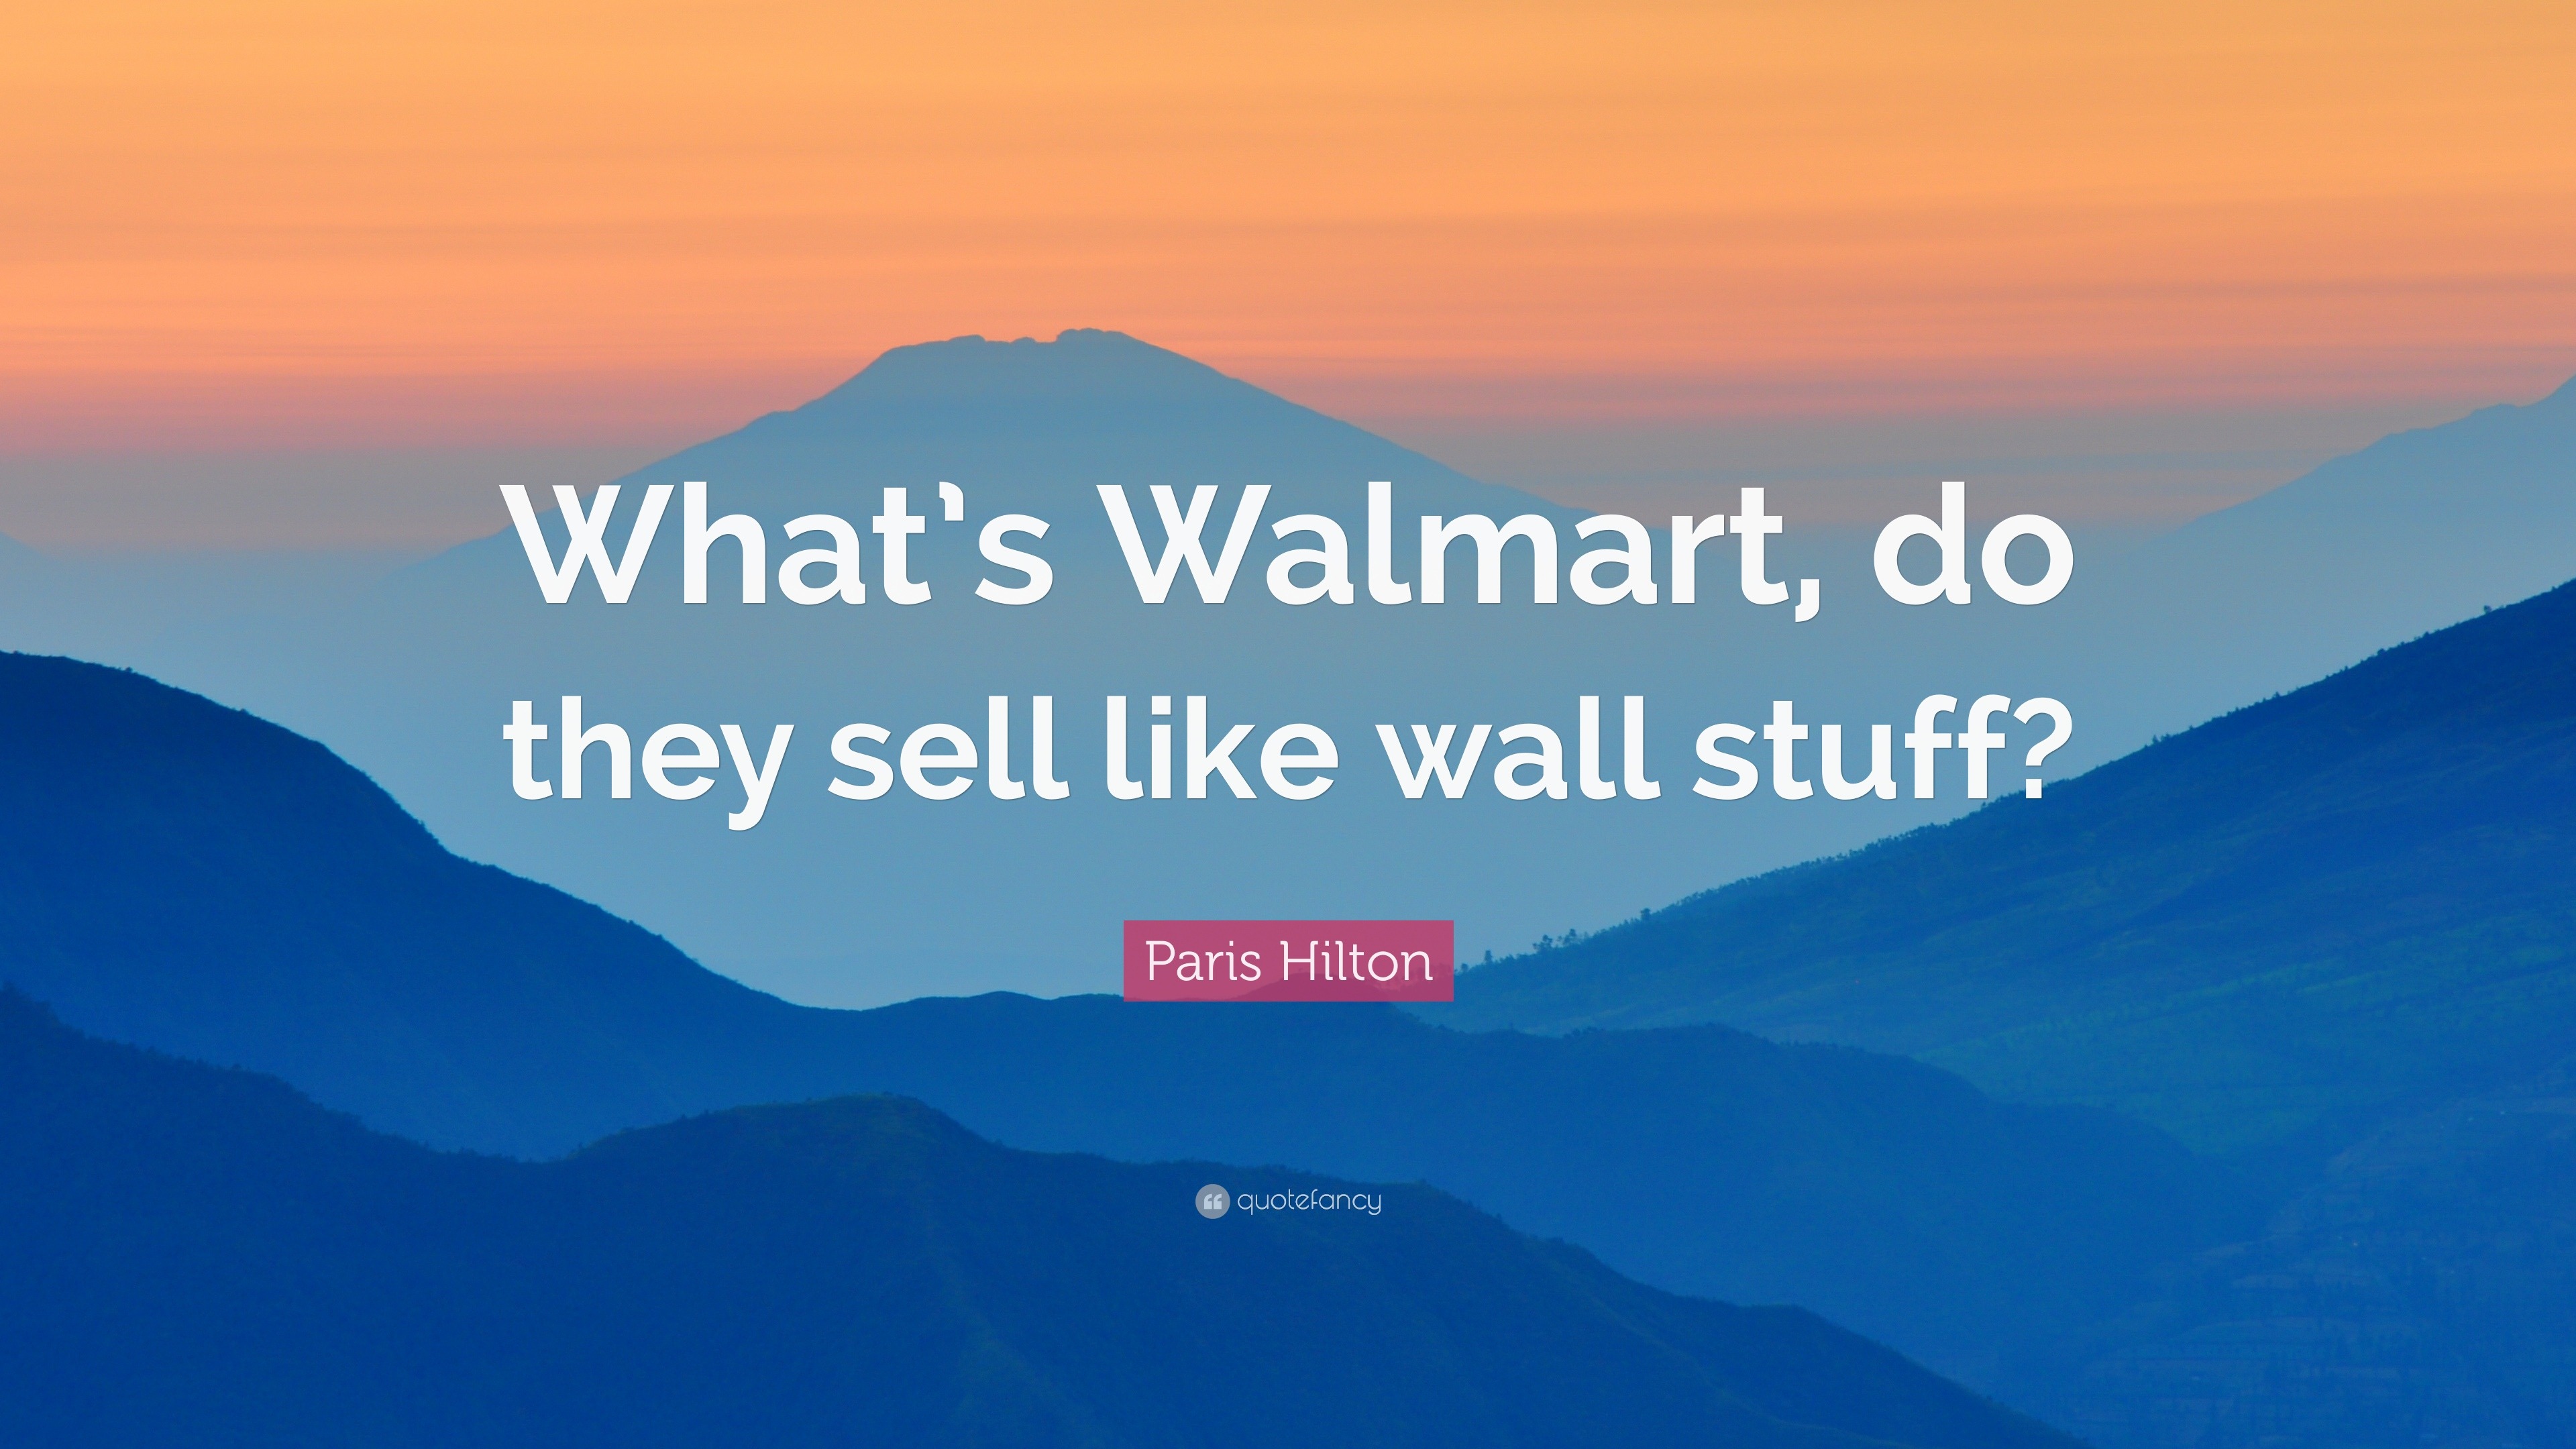 https://quotefancy.com/media/wallpaper/3840x2160/378433-Paris-Hilton-Quote-What-s-Walmart-do-they-sell-like-wall-stuff.jpg